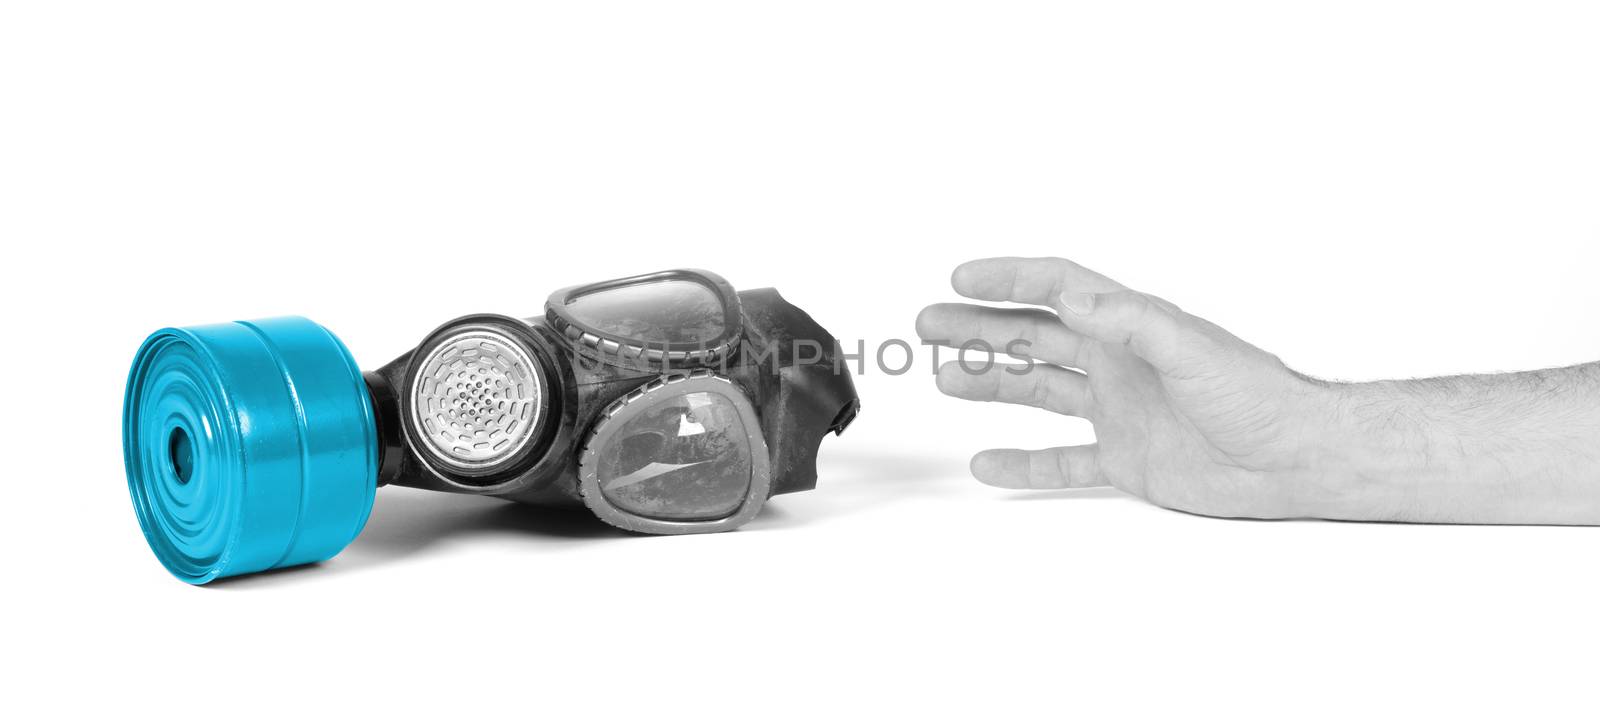 Arm reaching for vintage gasmask isolated on a white background - Blue filter